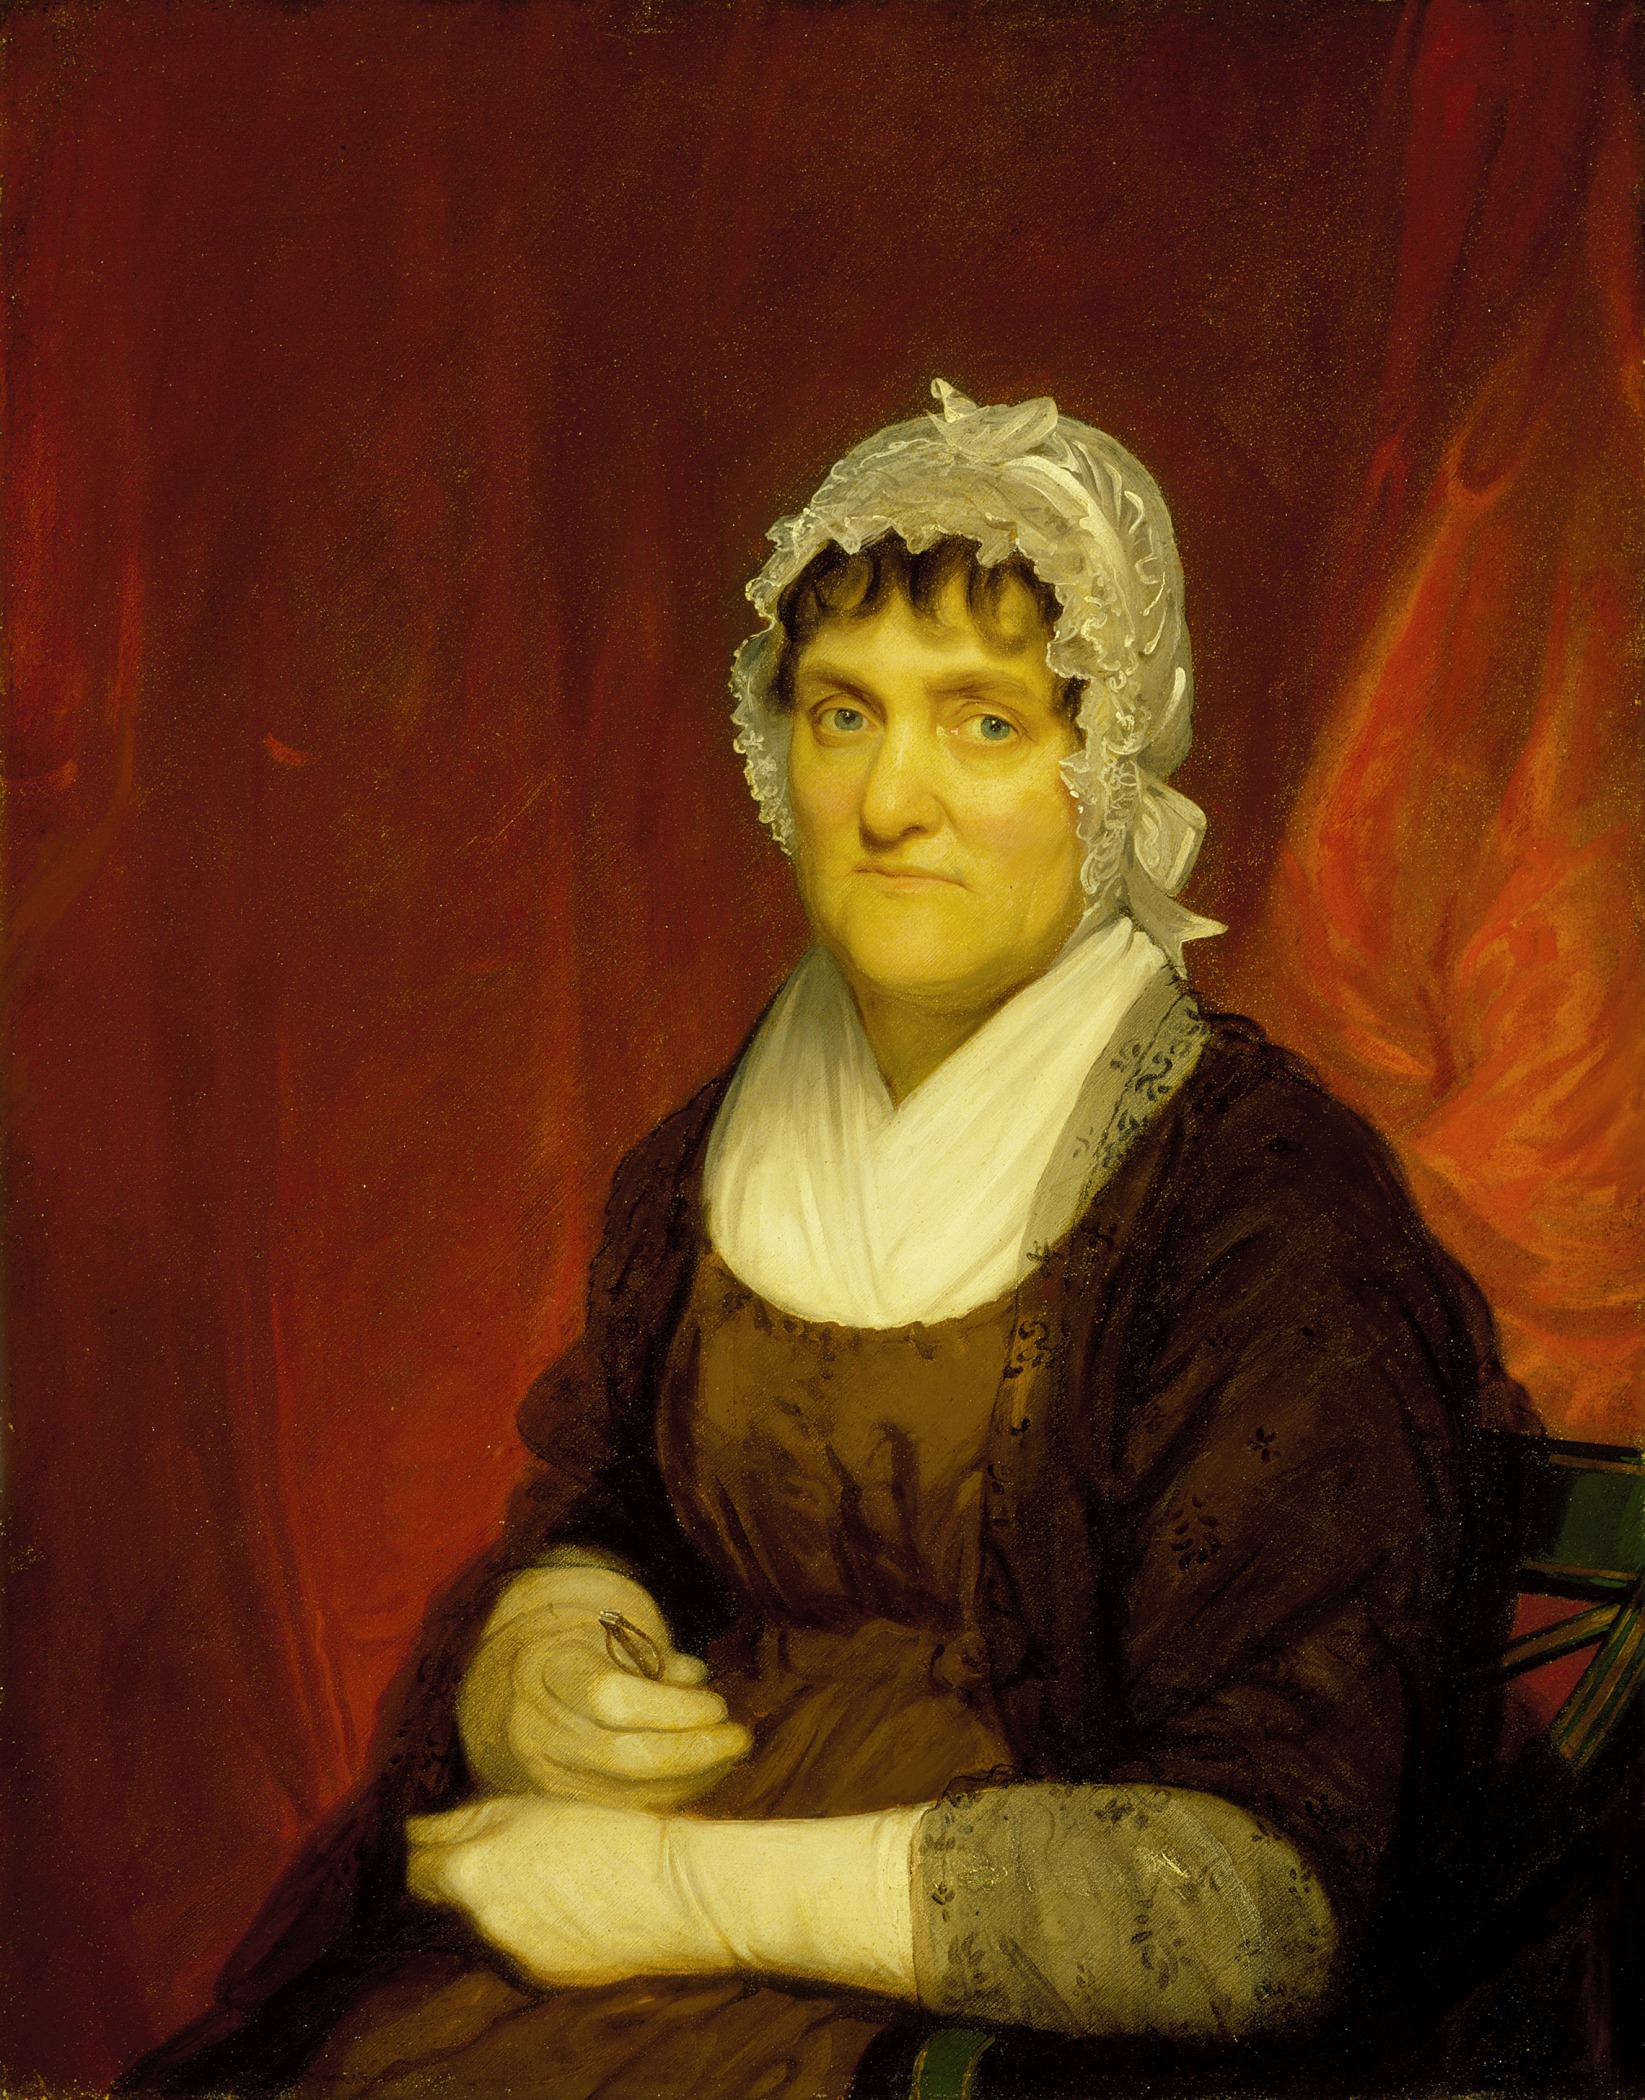 a painting of an older woman wearing a lace headpiece and sitting